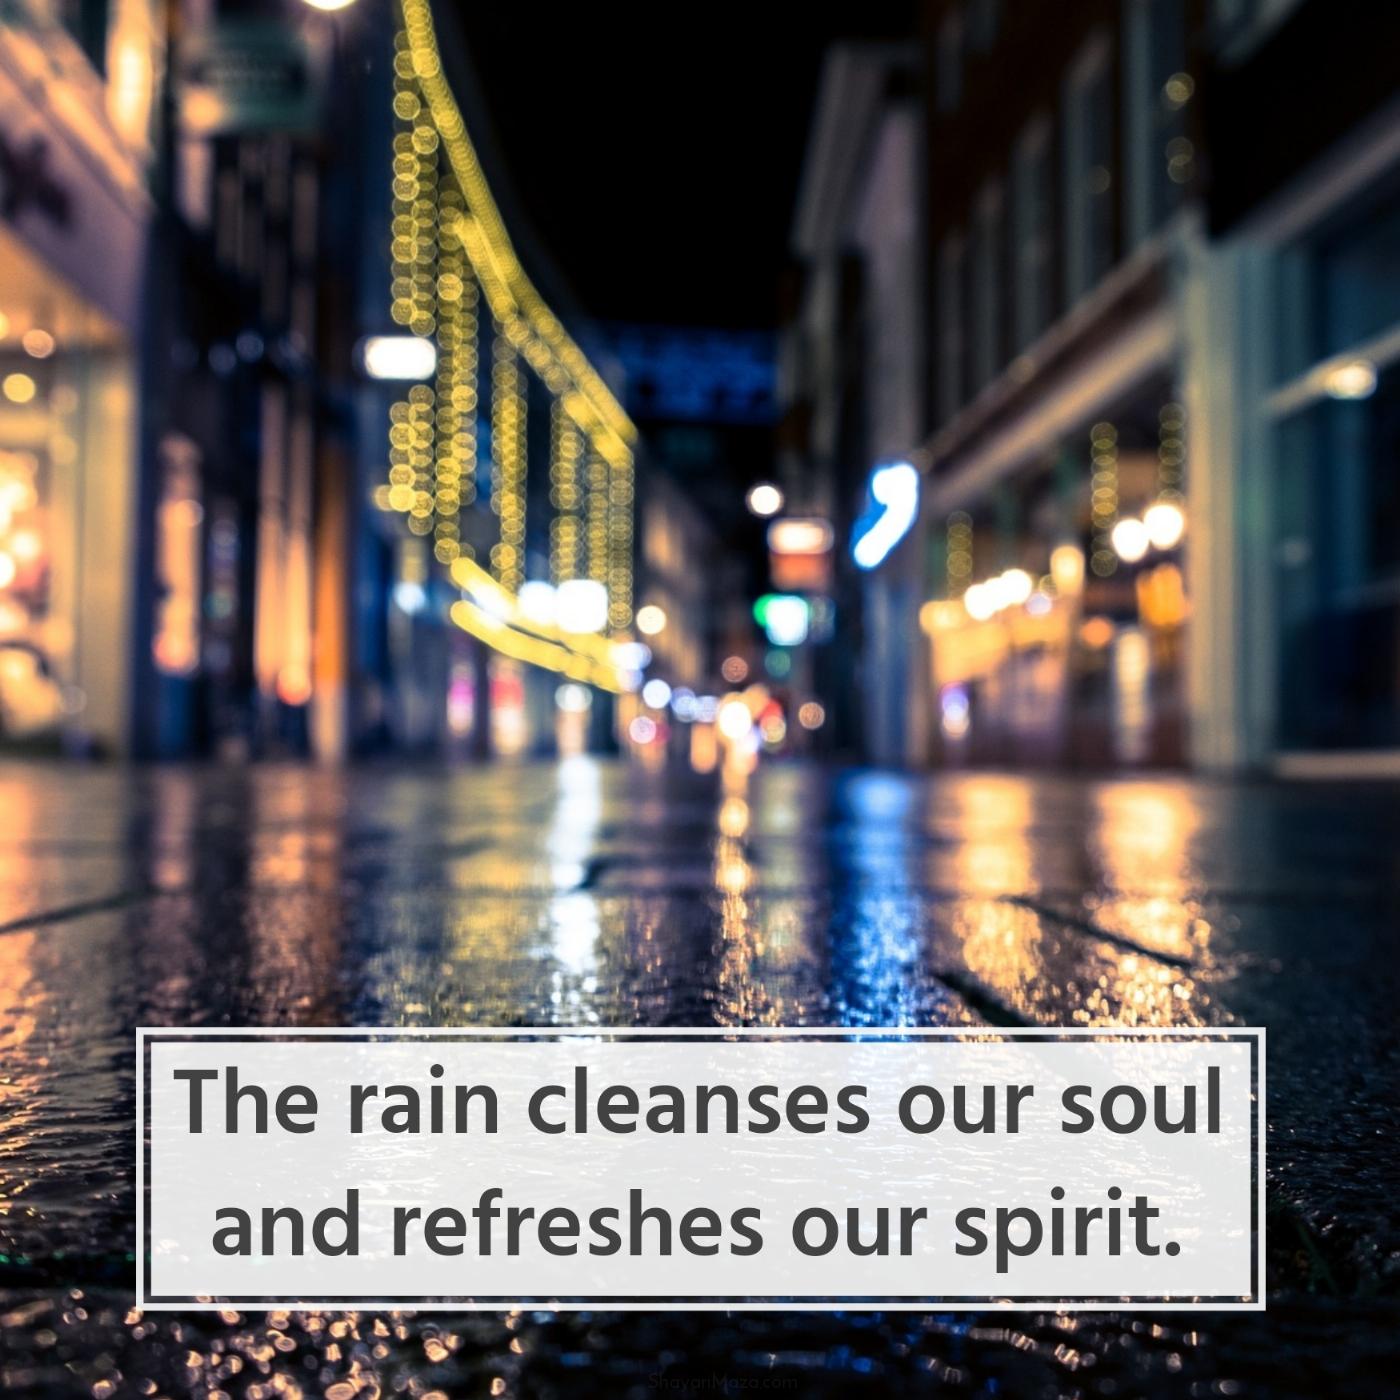 The rain cleanses our soul and refreshes our spirit